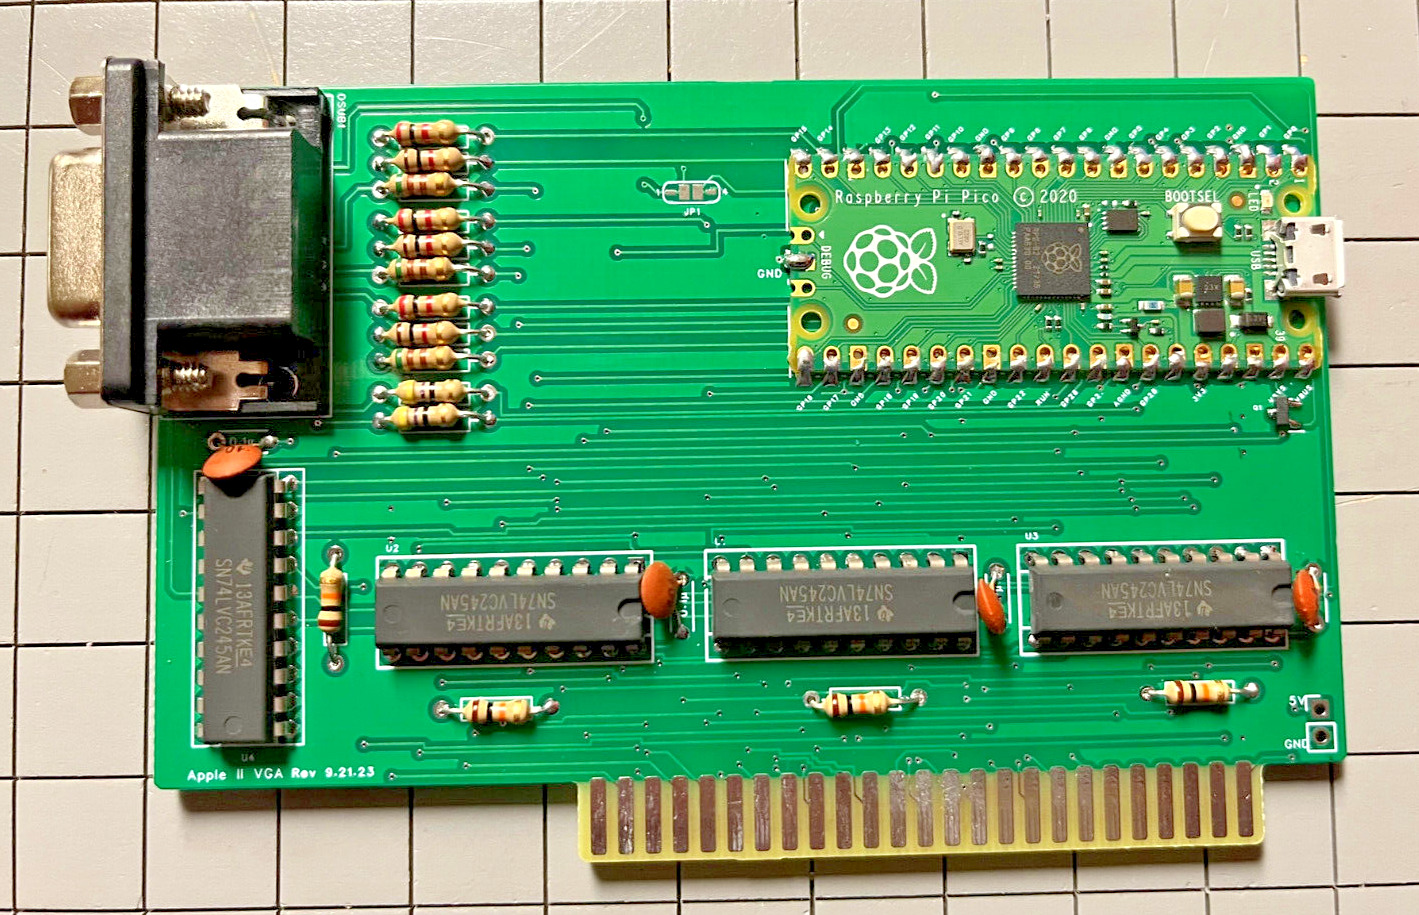 APPLE IIe VGA Graphics Card Sharp Graphics Fully Built and Programmed